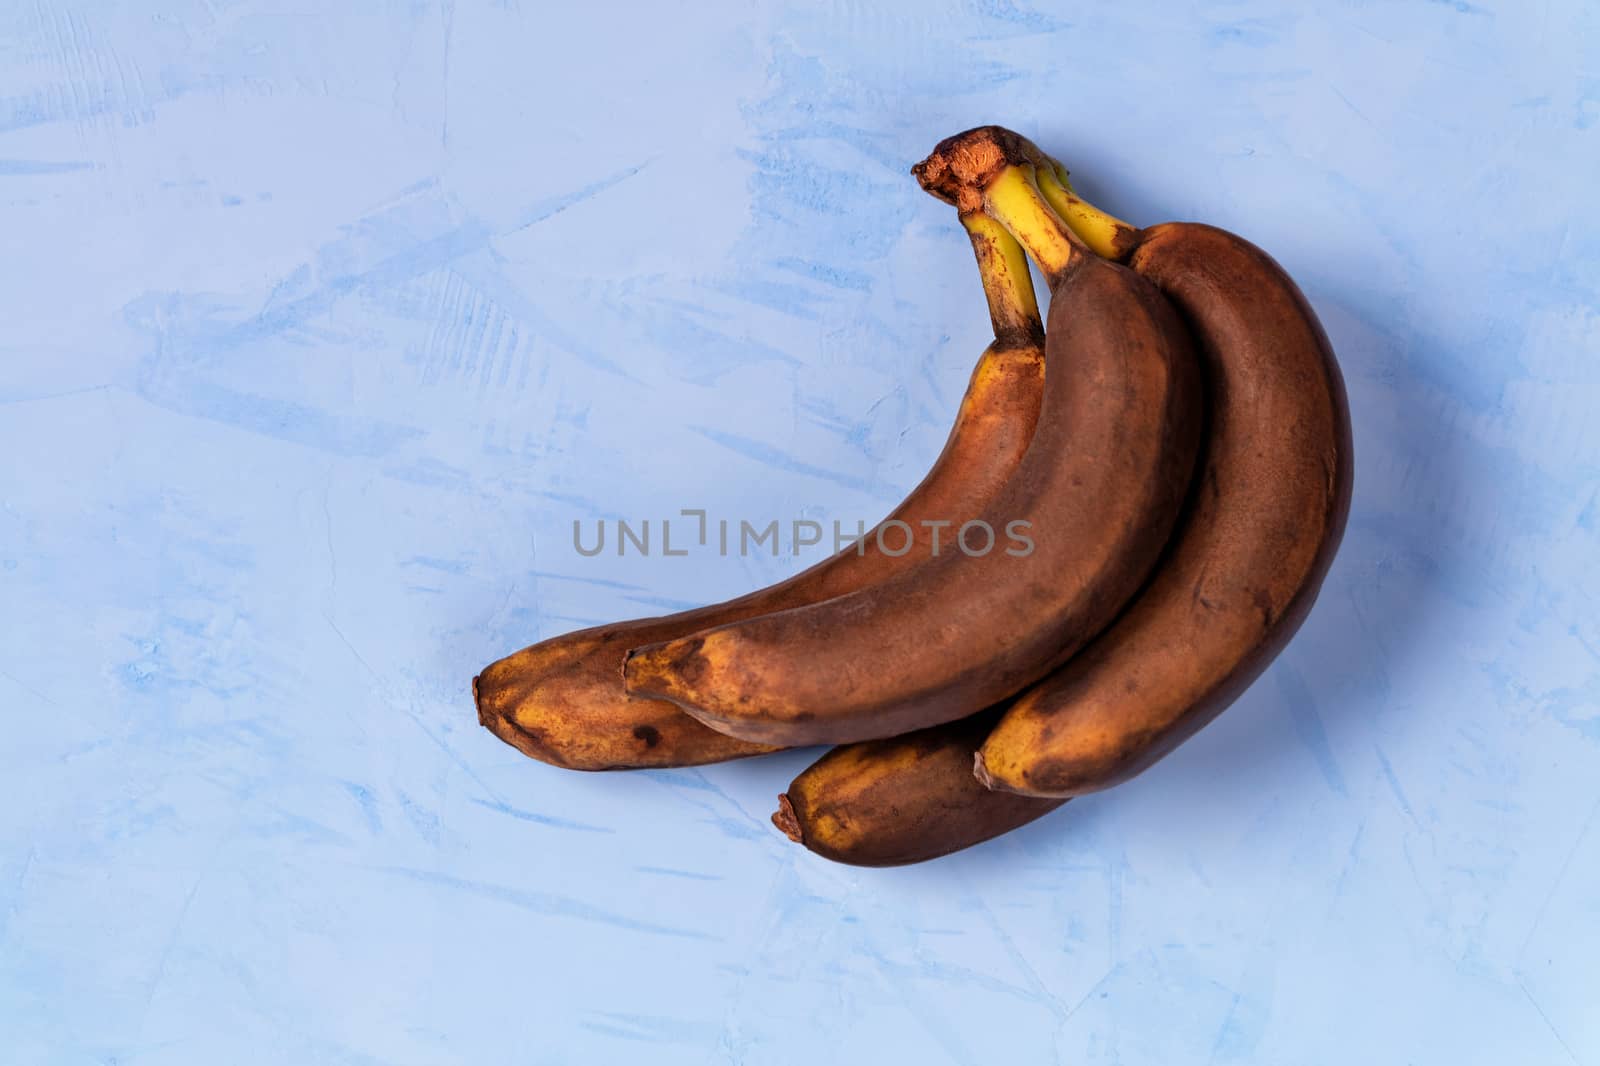 Ugly brown ripe bananas on a background of blue stucco, flat lay, image with copy space.